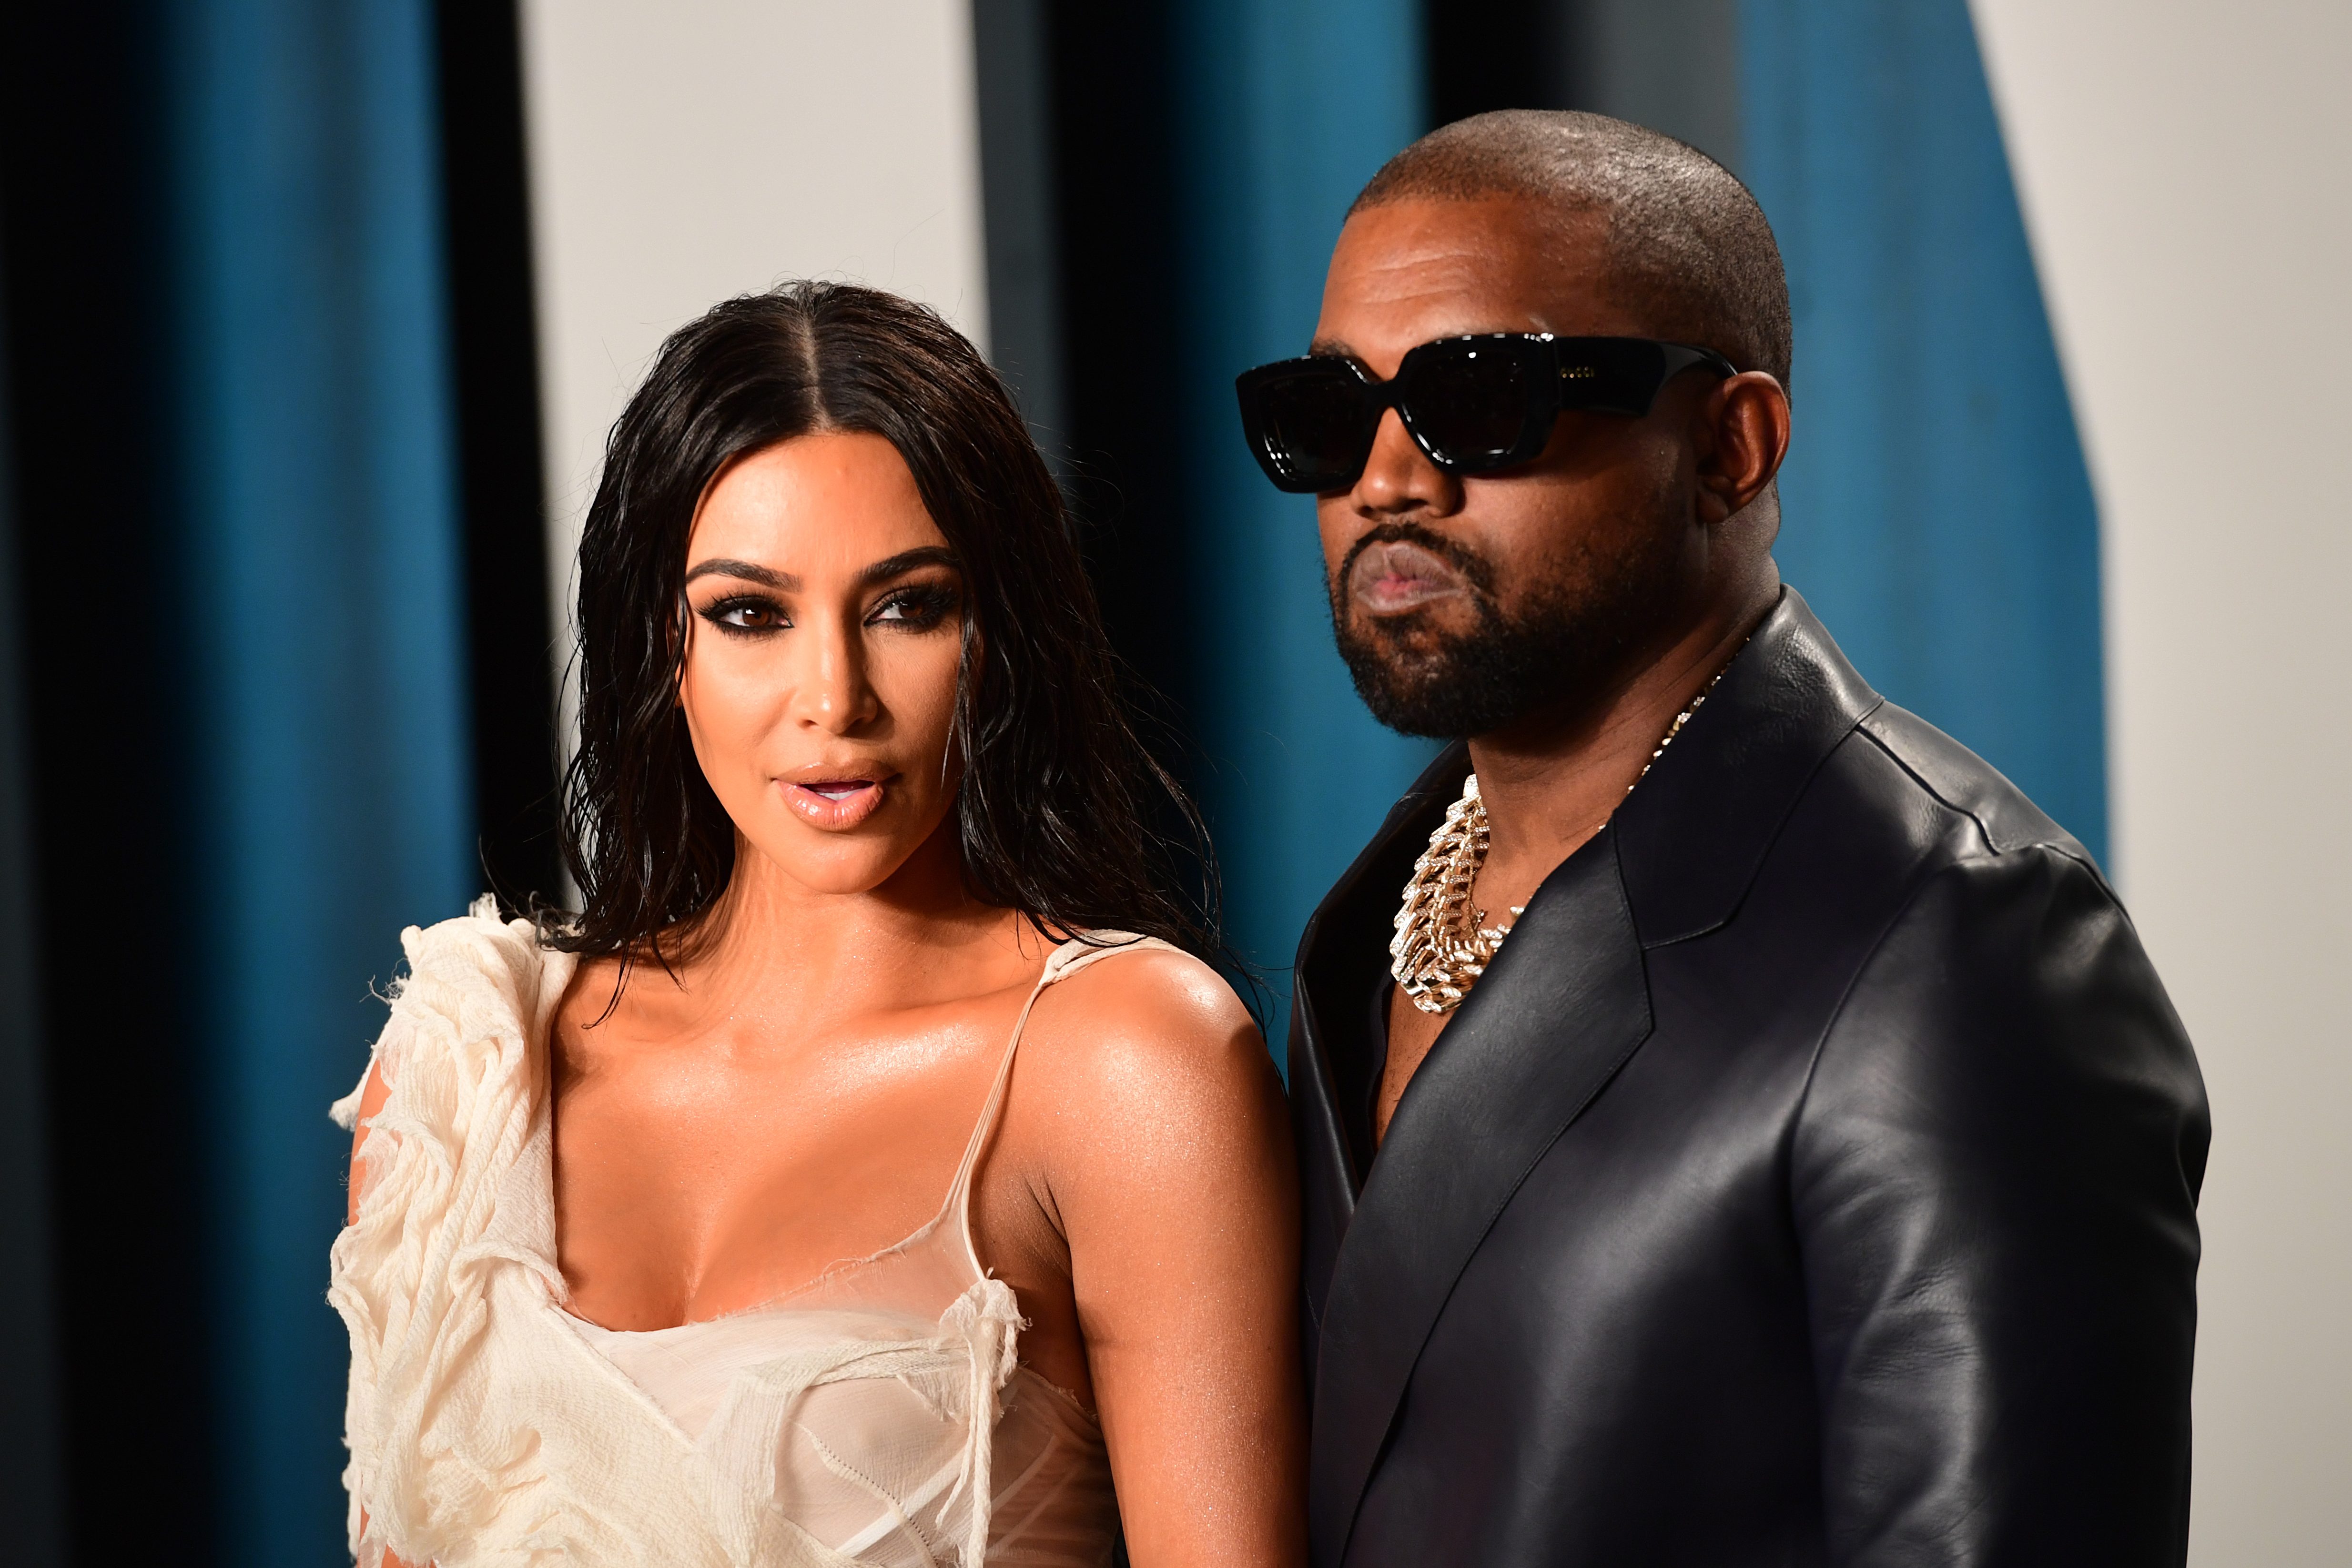 Kim Kardashian and Kanye West attending the Vanity Fair Oscar Party held at the Wallis Annenberg Center for the Performing Arts in Beverly Hills, Los Angeles, California, USA. West has been leaving increasingly disturbing messages to his his estranged wife over the past few days on social media.